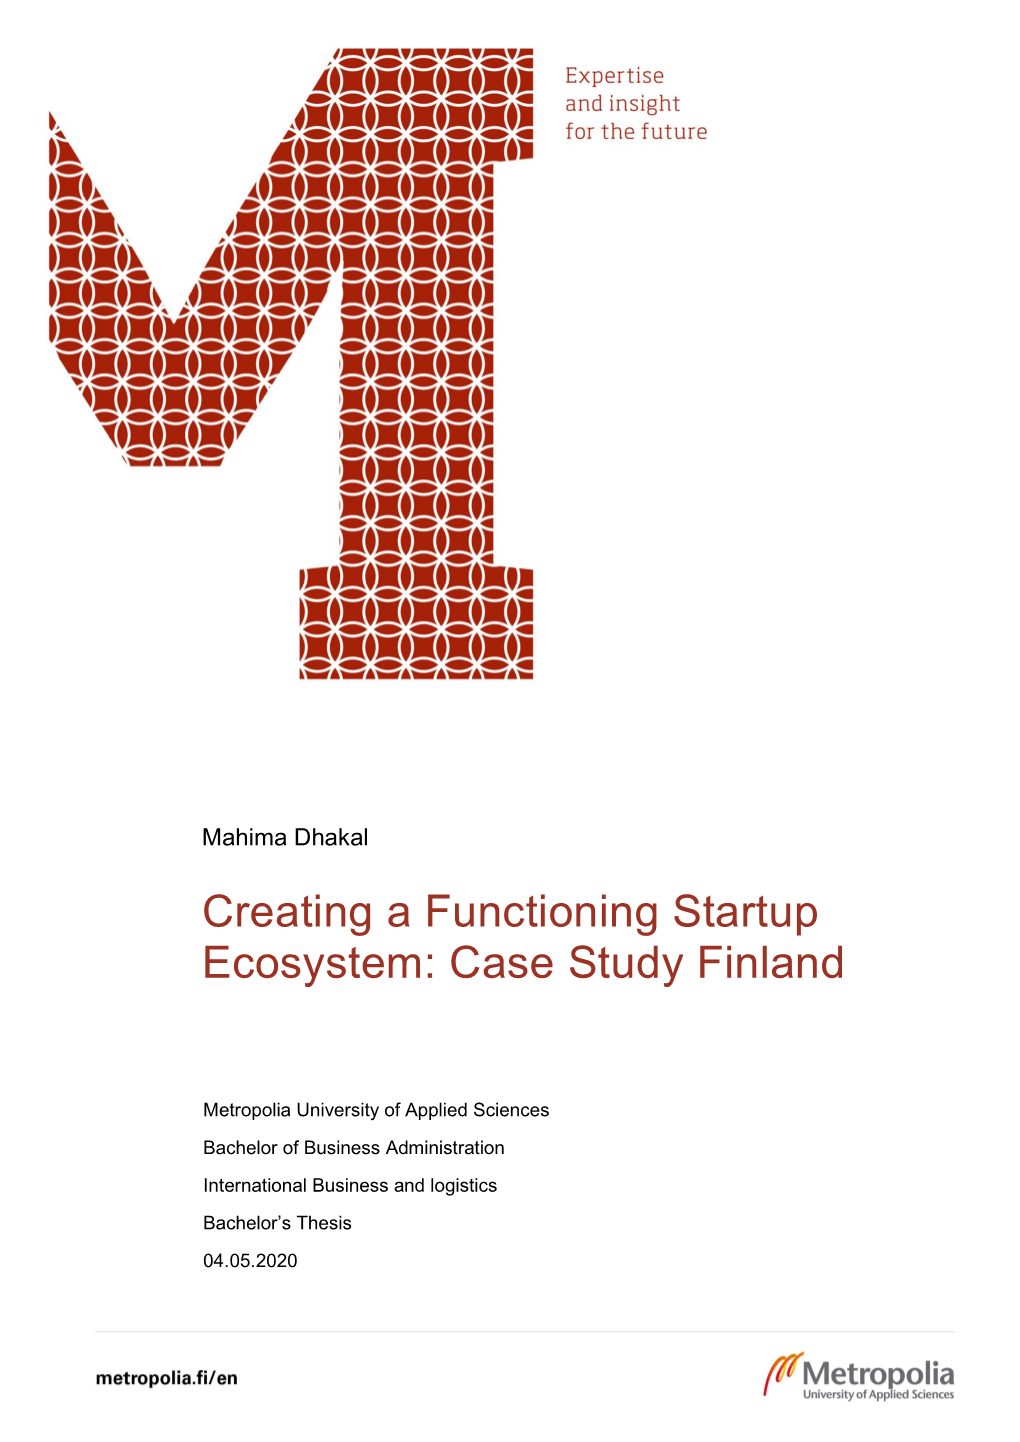 Creating a Functioning Startup Ecosystem: Case Study Finland